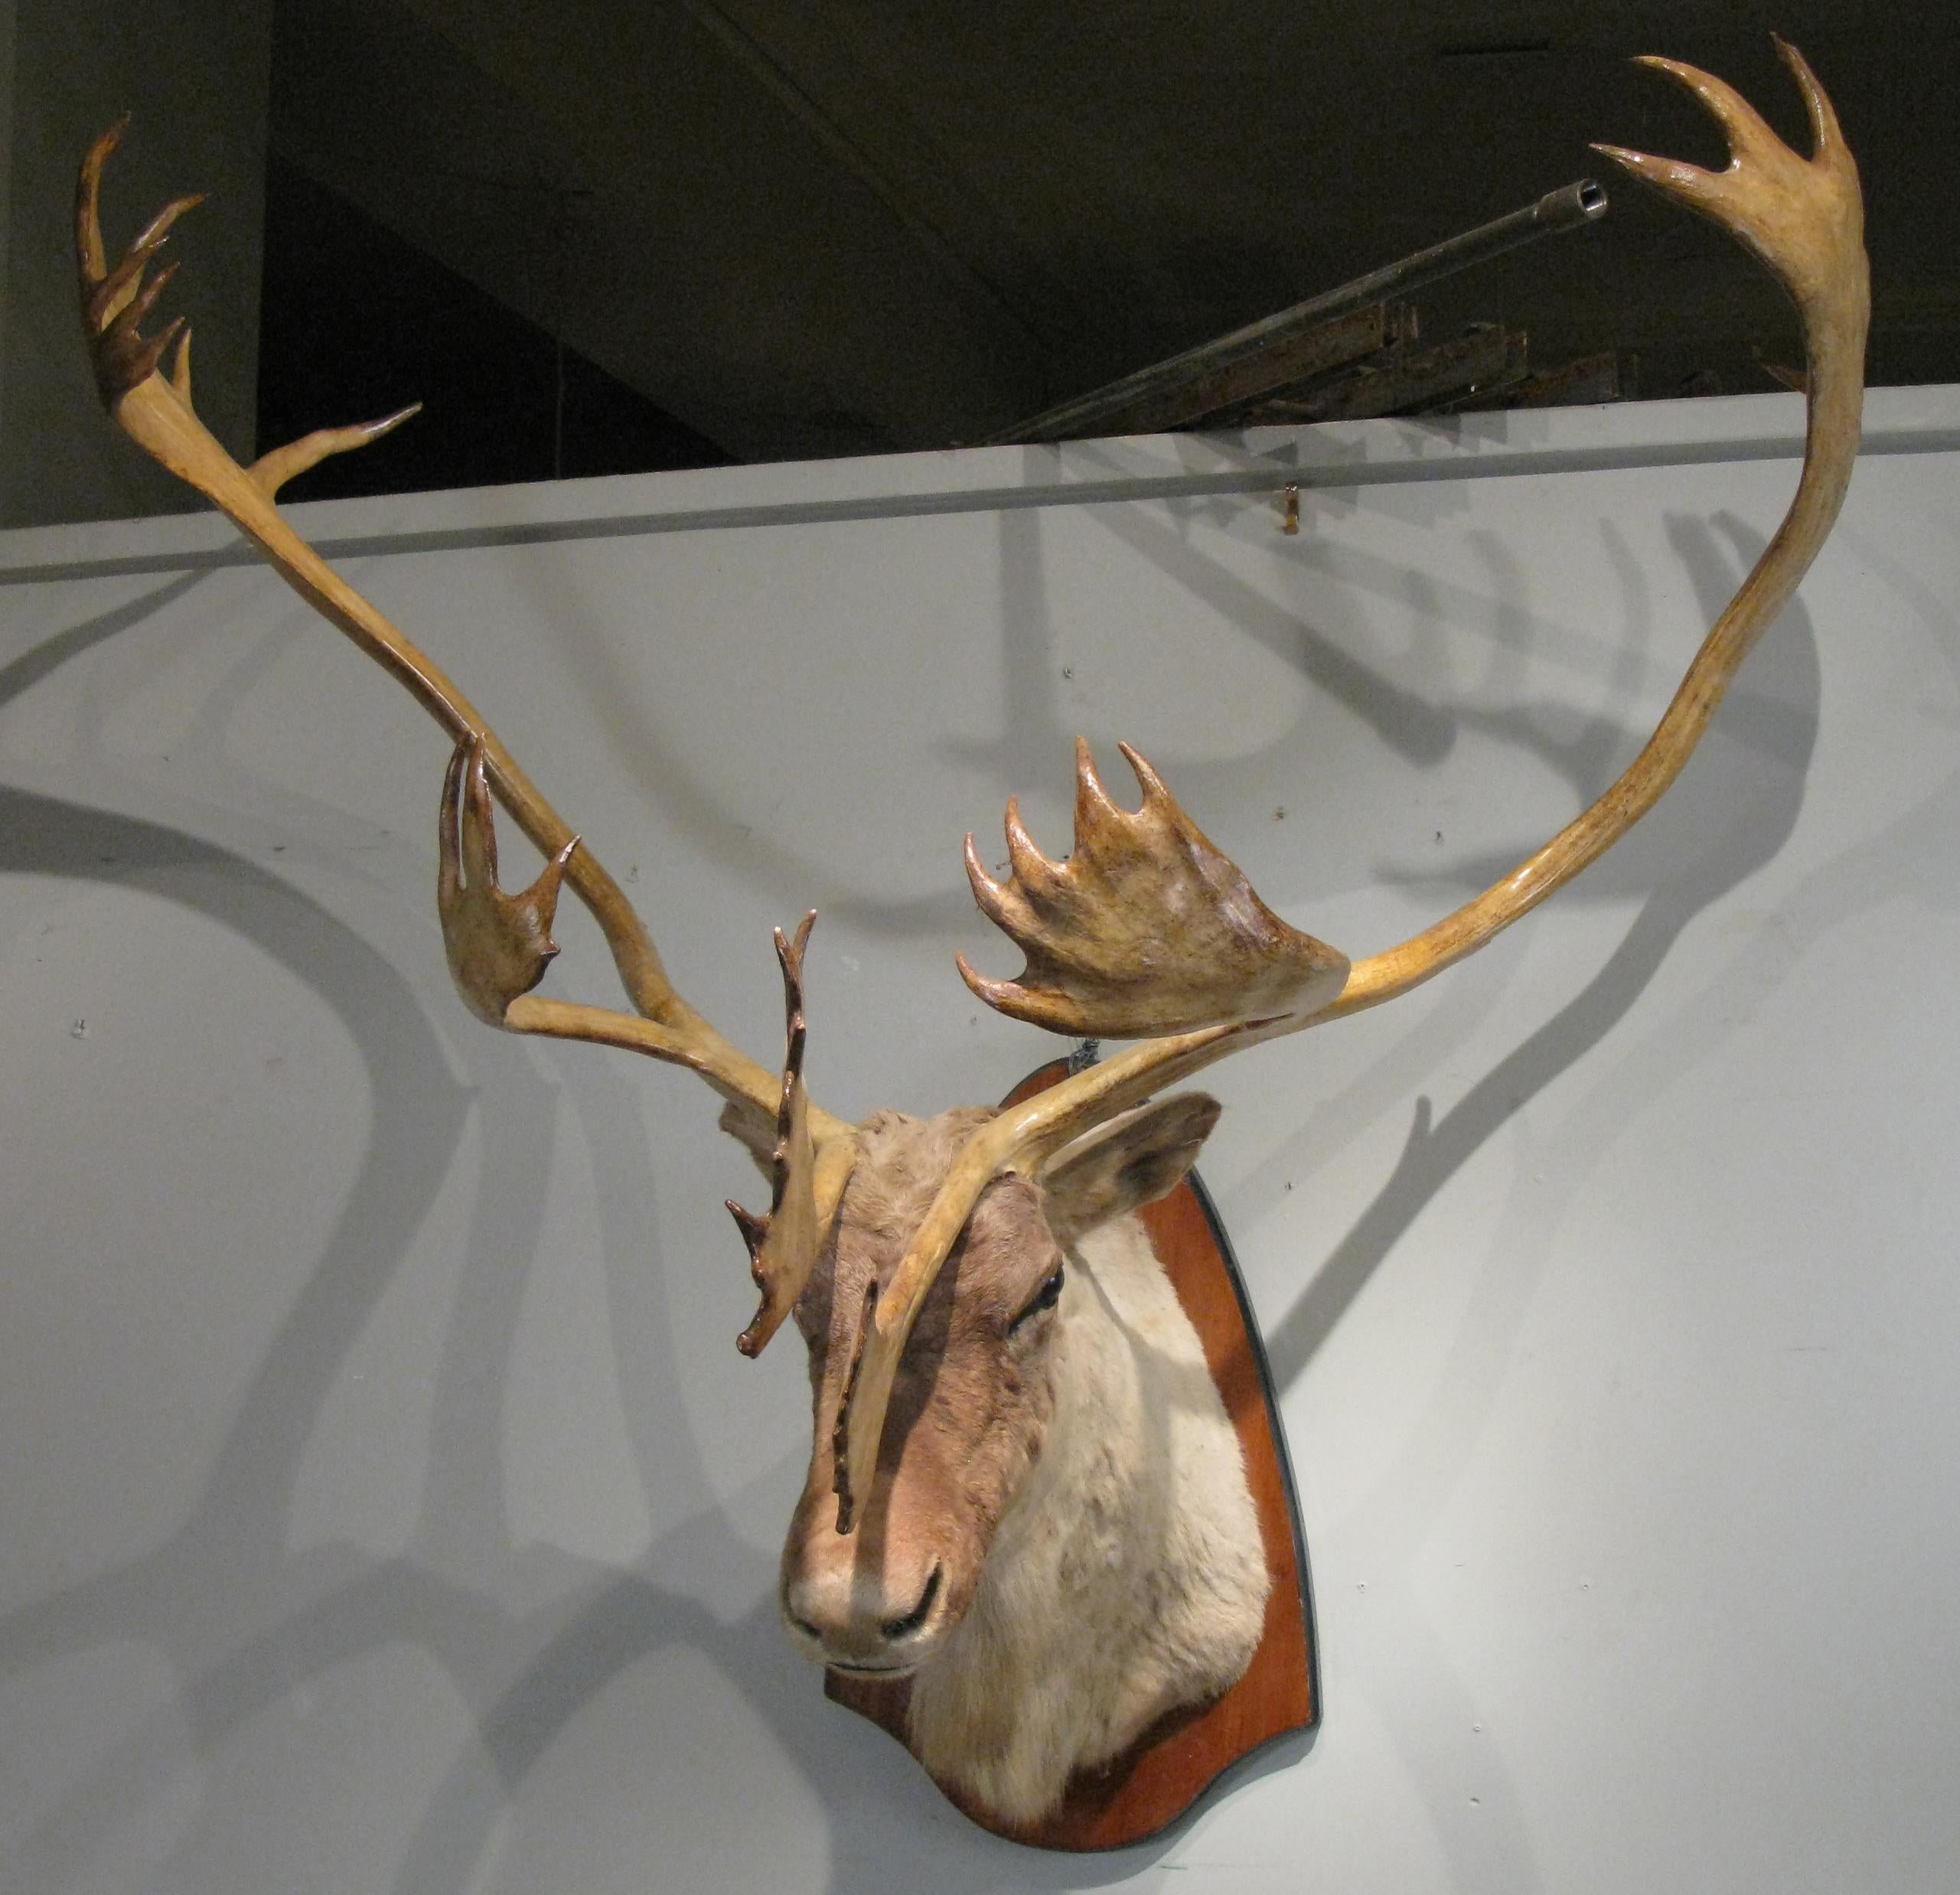 A beautiful taxidermy caribou mount, with very large and elegant antlers, including sets of fins above the face. Really wonderful and nicely done.